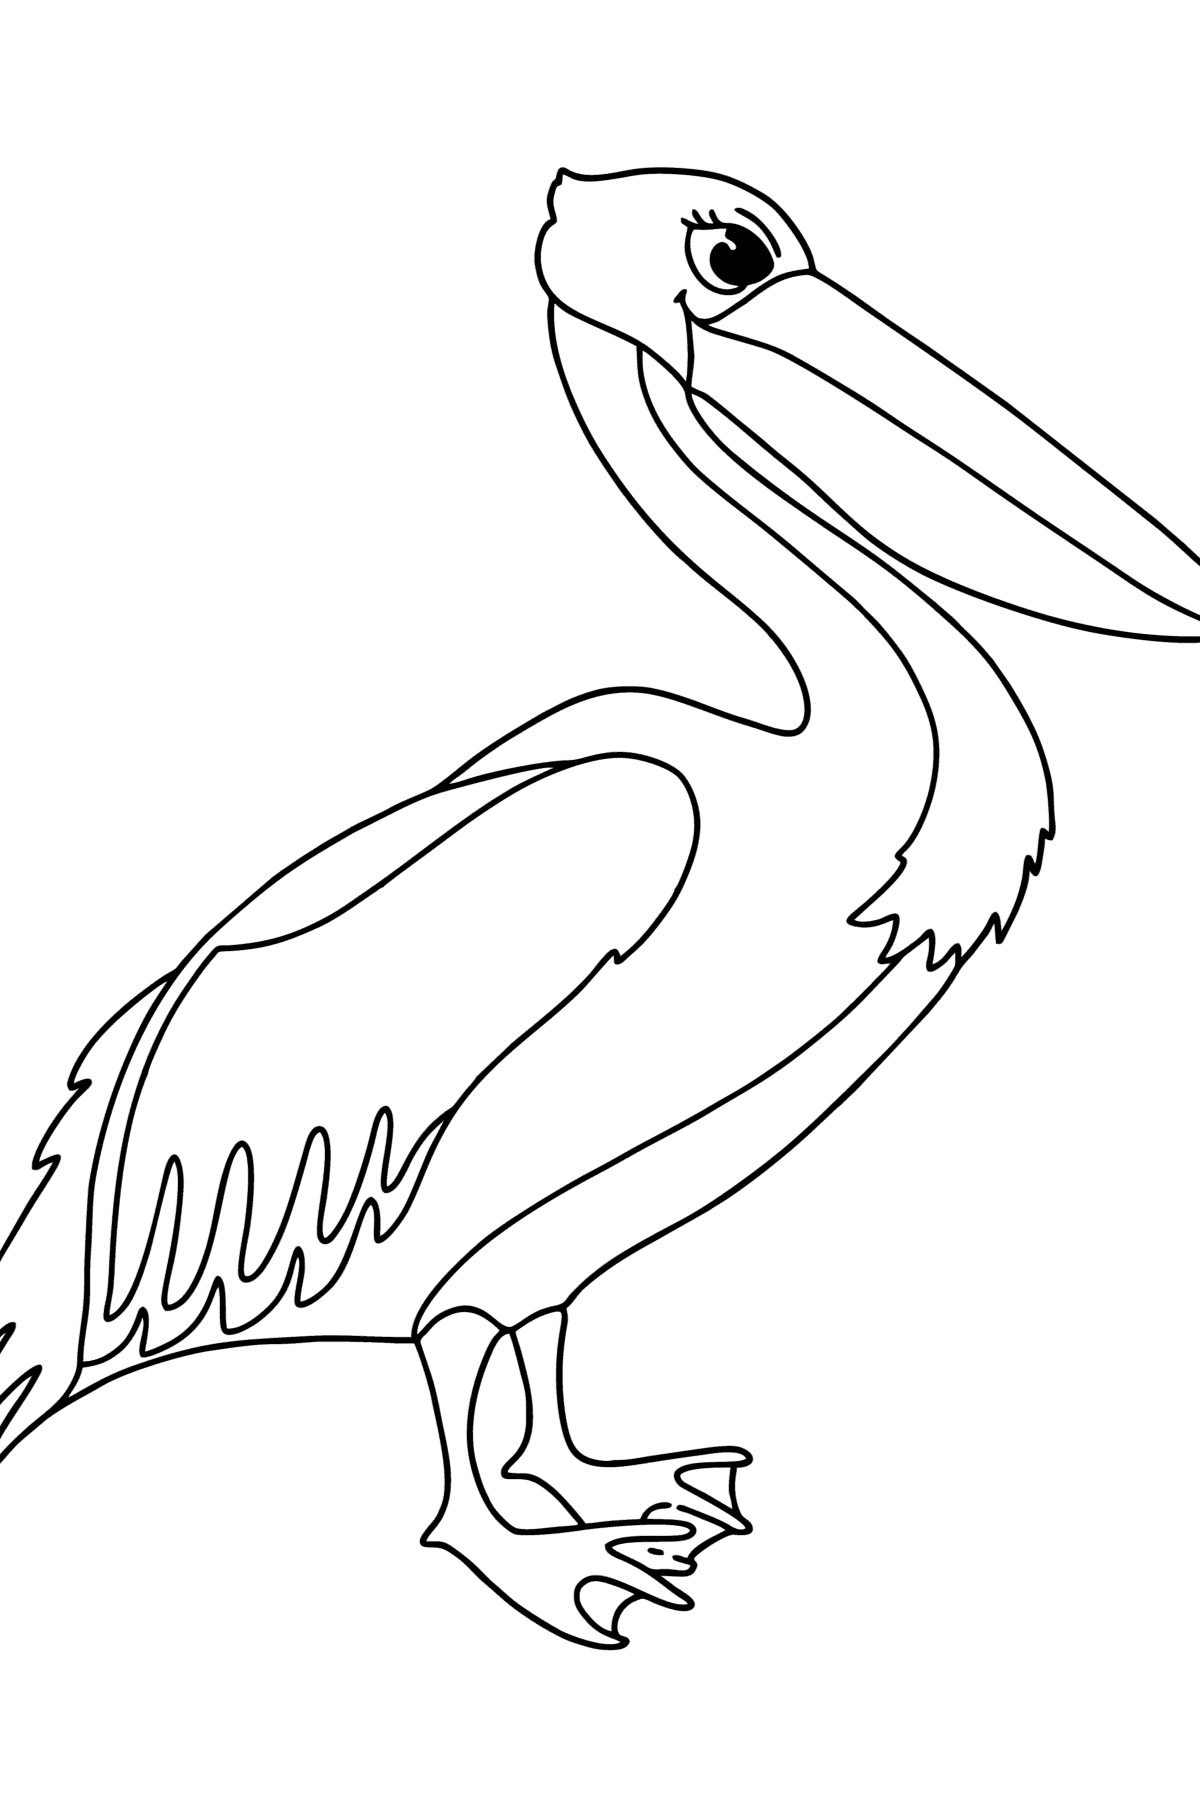 Pelican сoloring page - Coloring Pages for Kids